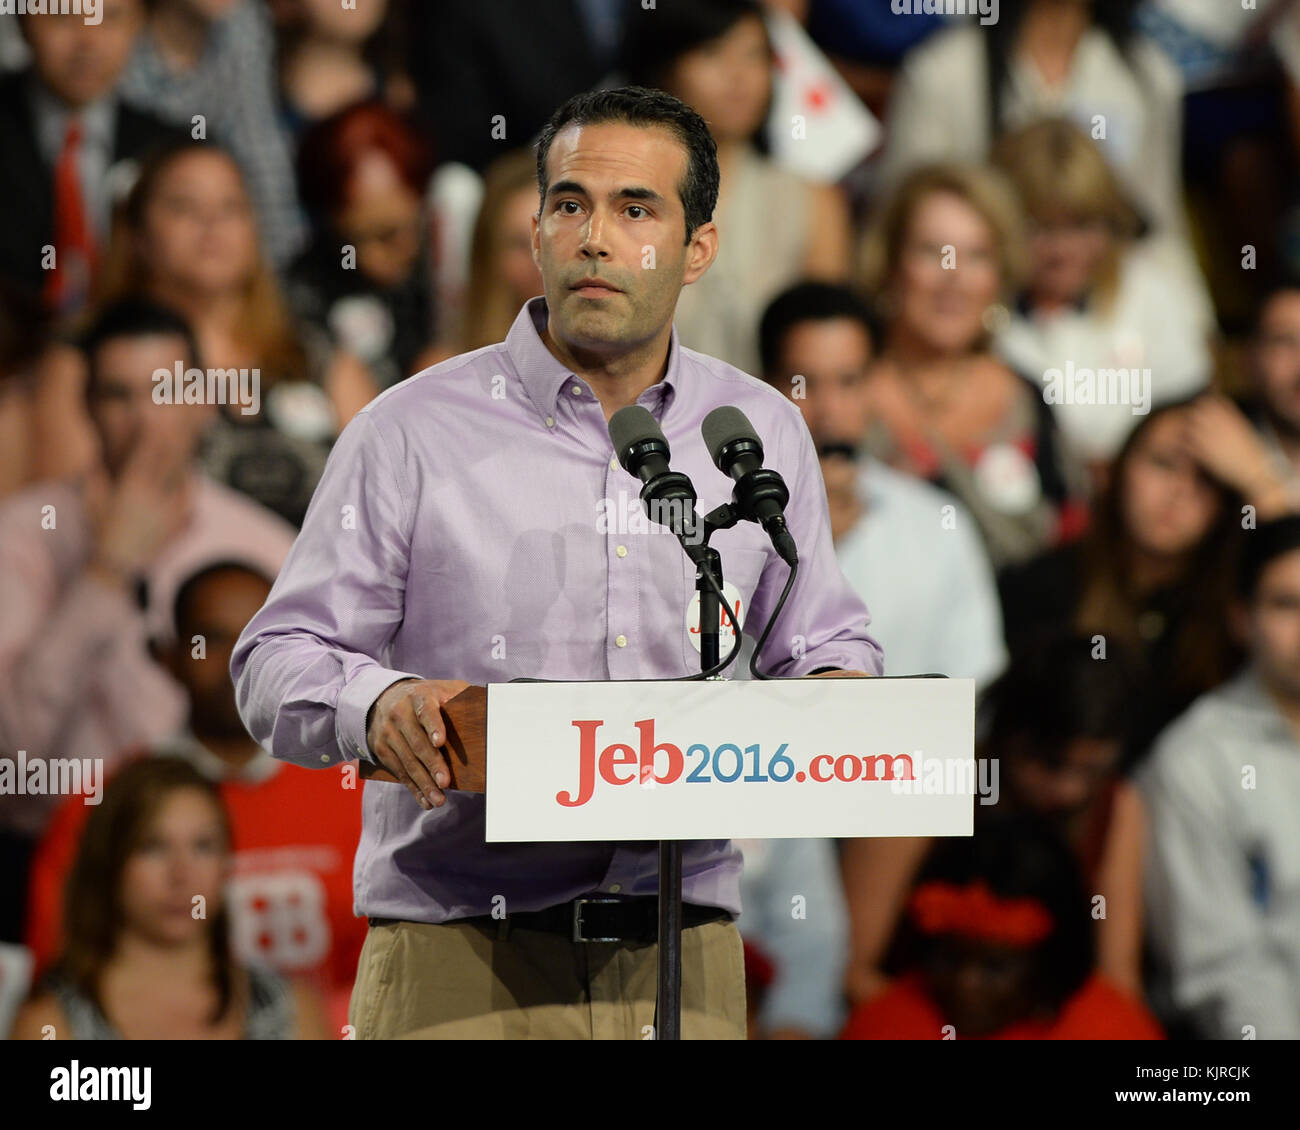 MIAMI, FL - JUNE 15: Former Florida Governor Jeb Bush announces his candidacy for the 2016 Republican Presidential nomination during a rally at Miami Dade College on June 15, 2015 in Miami, Florida   People:  George P. Bush Stock Photo